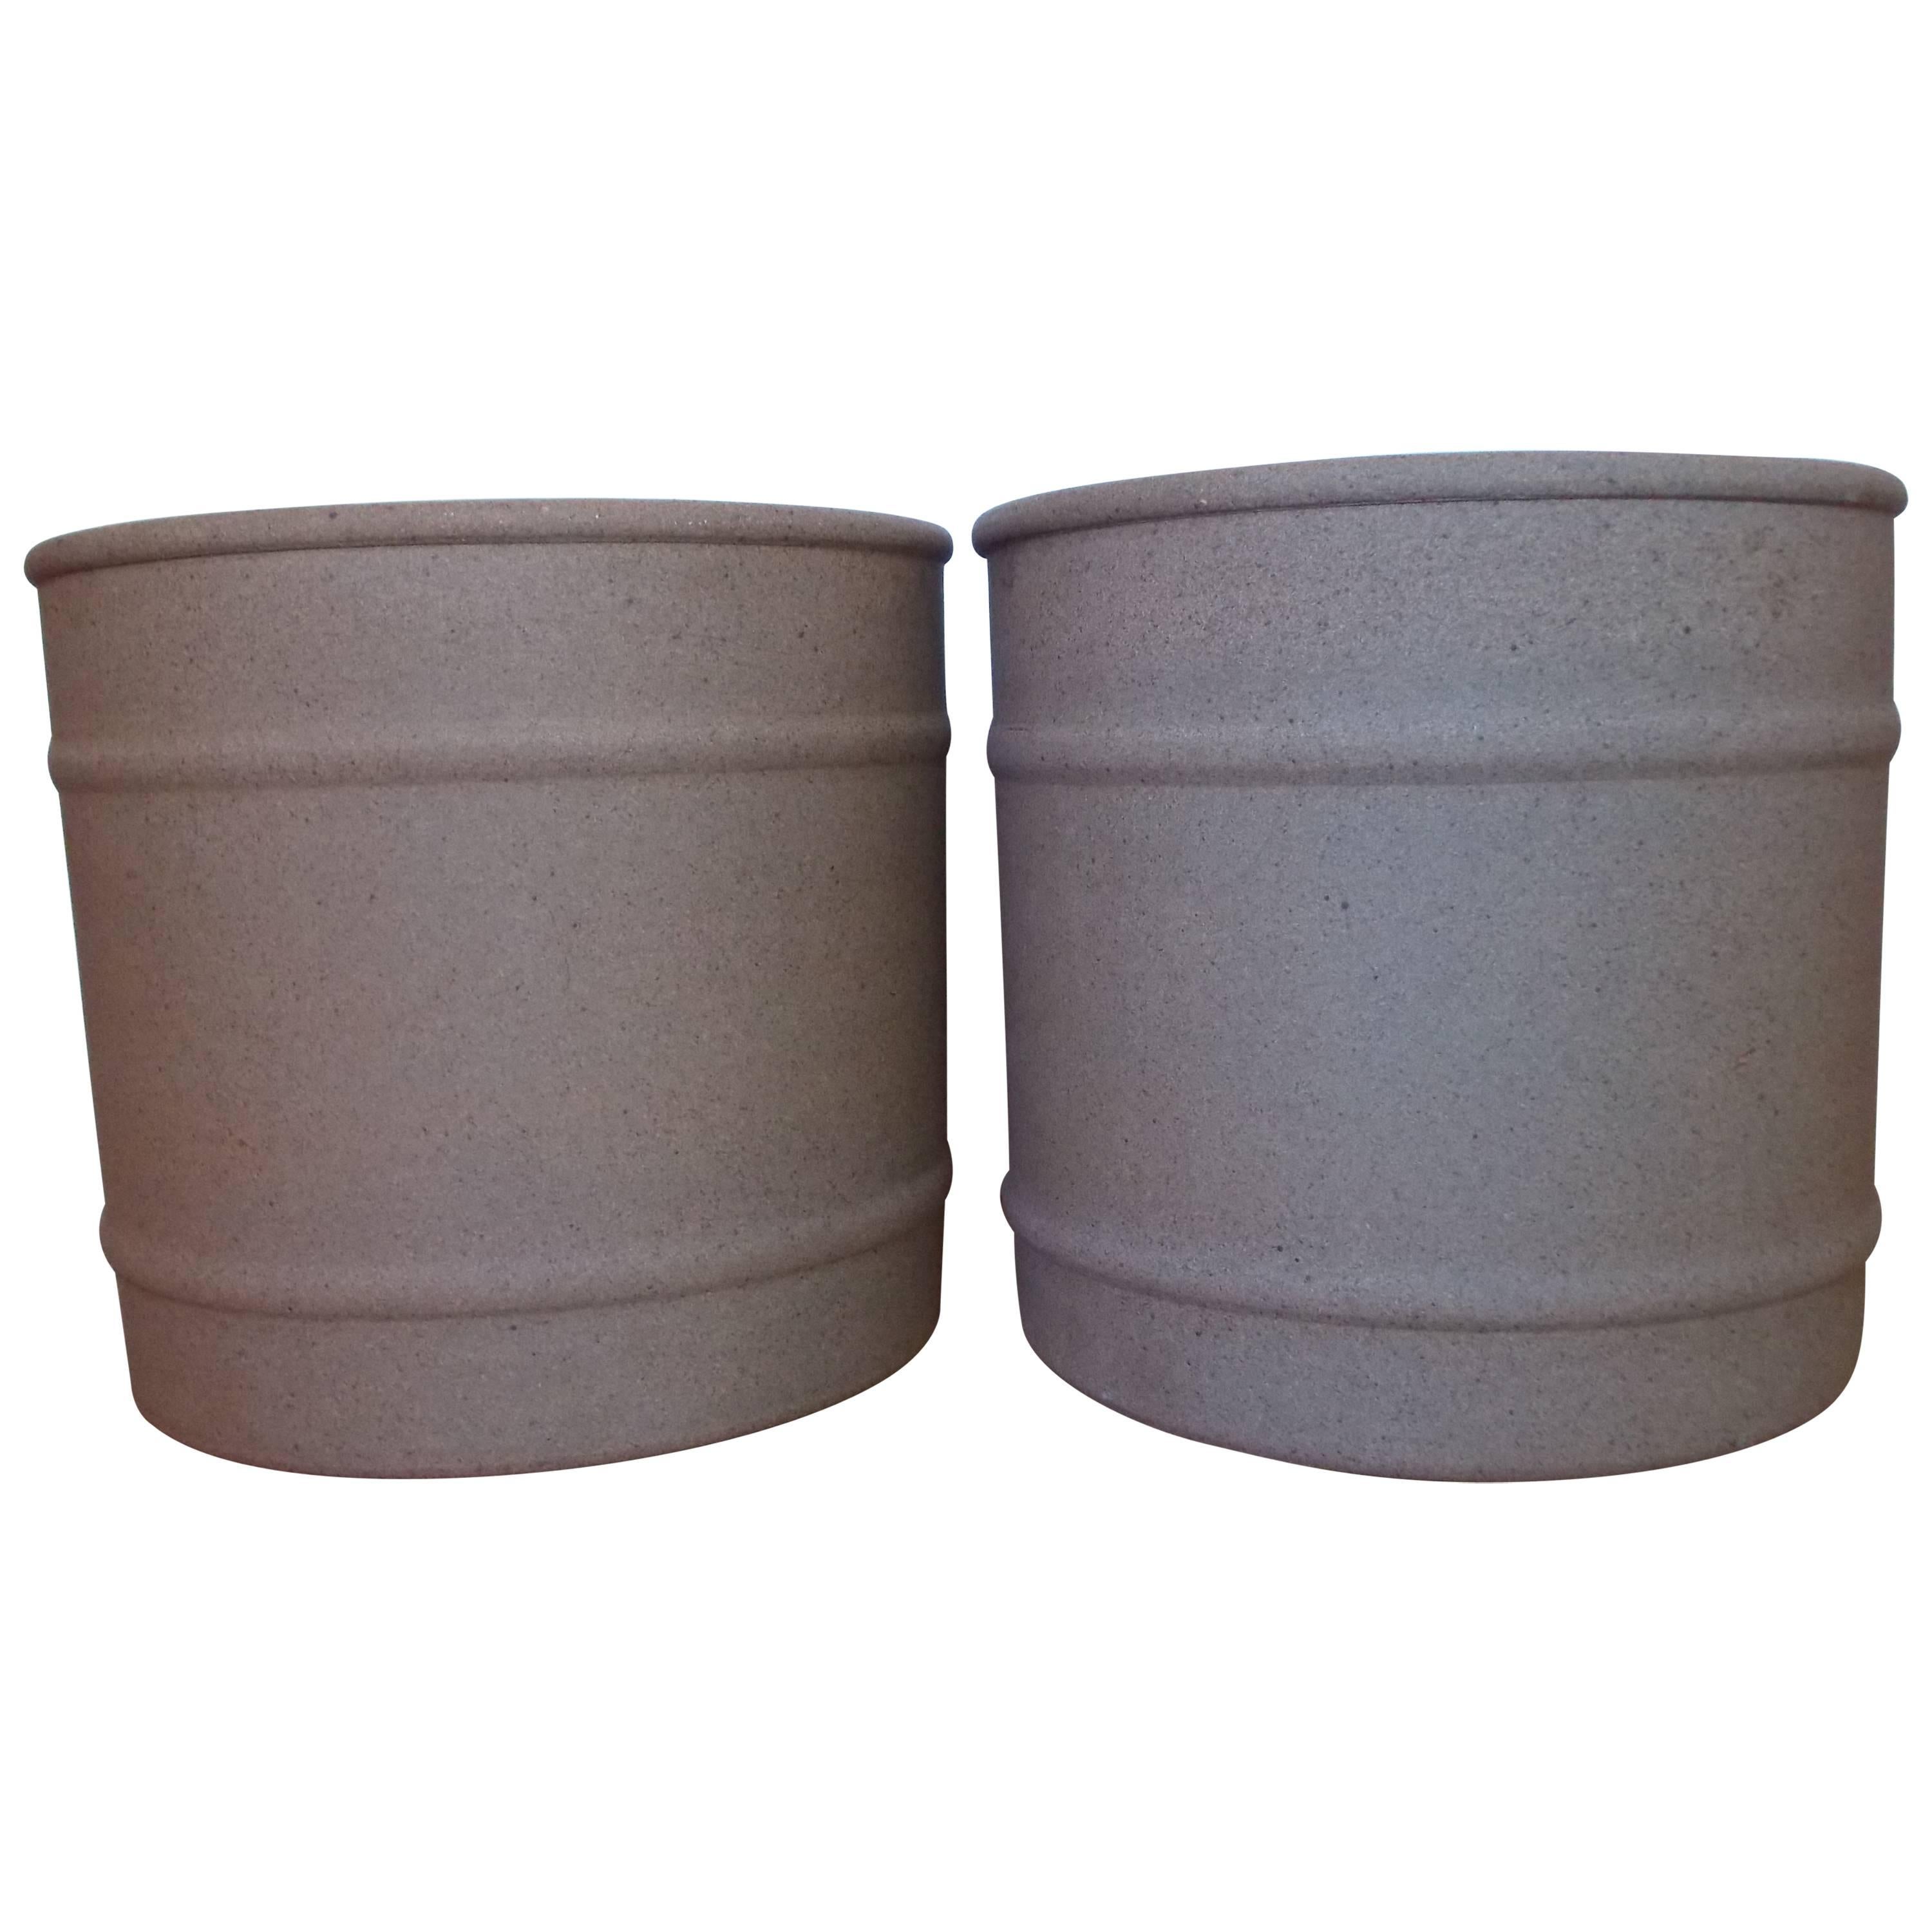 David Cressey Architectural Pottery Barrel Style Planters